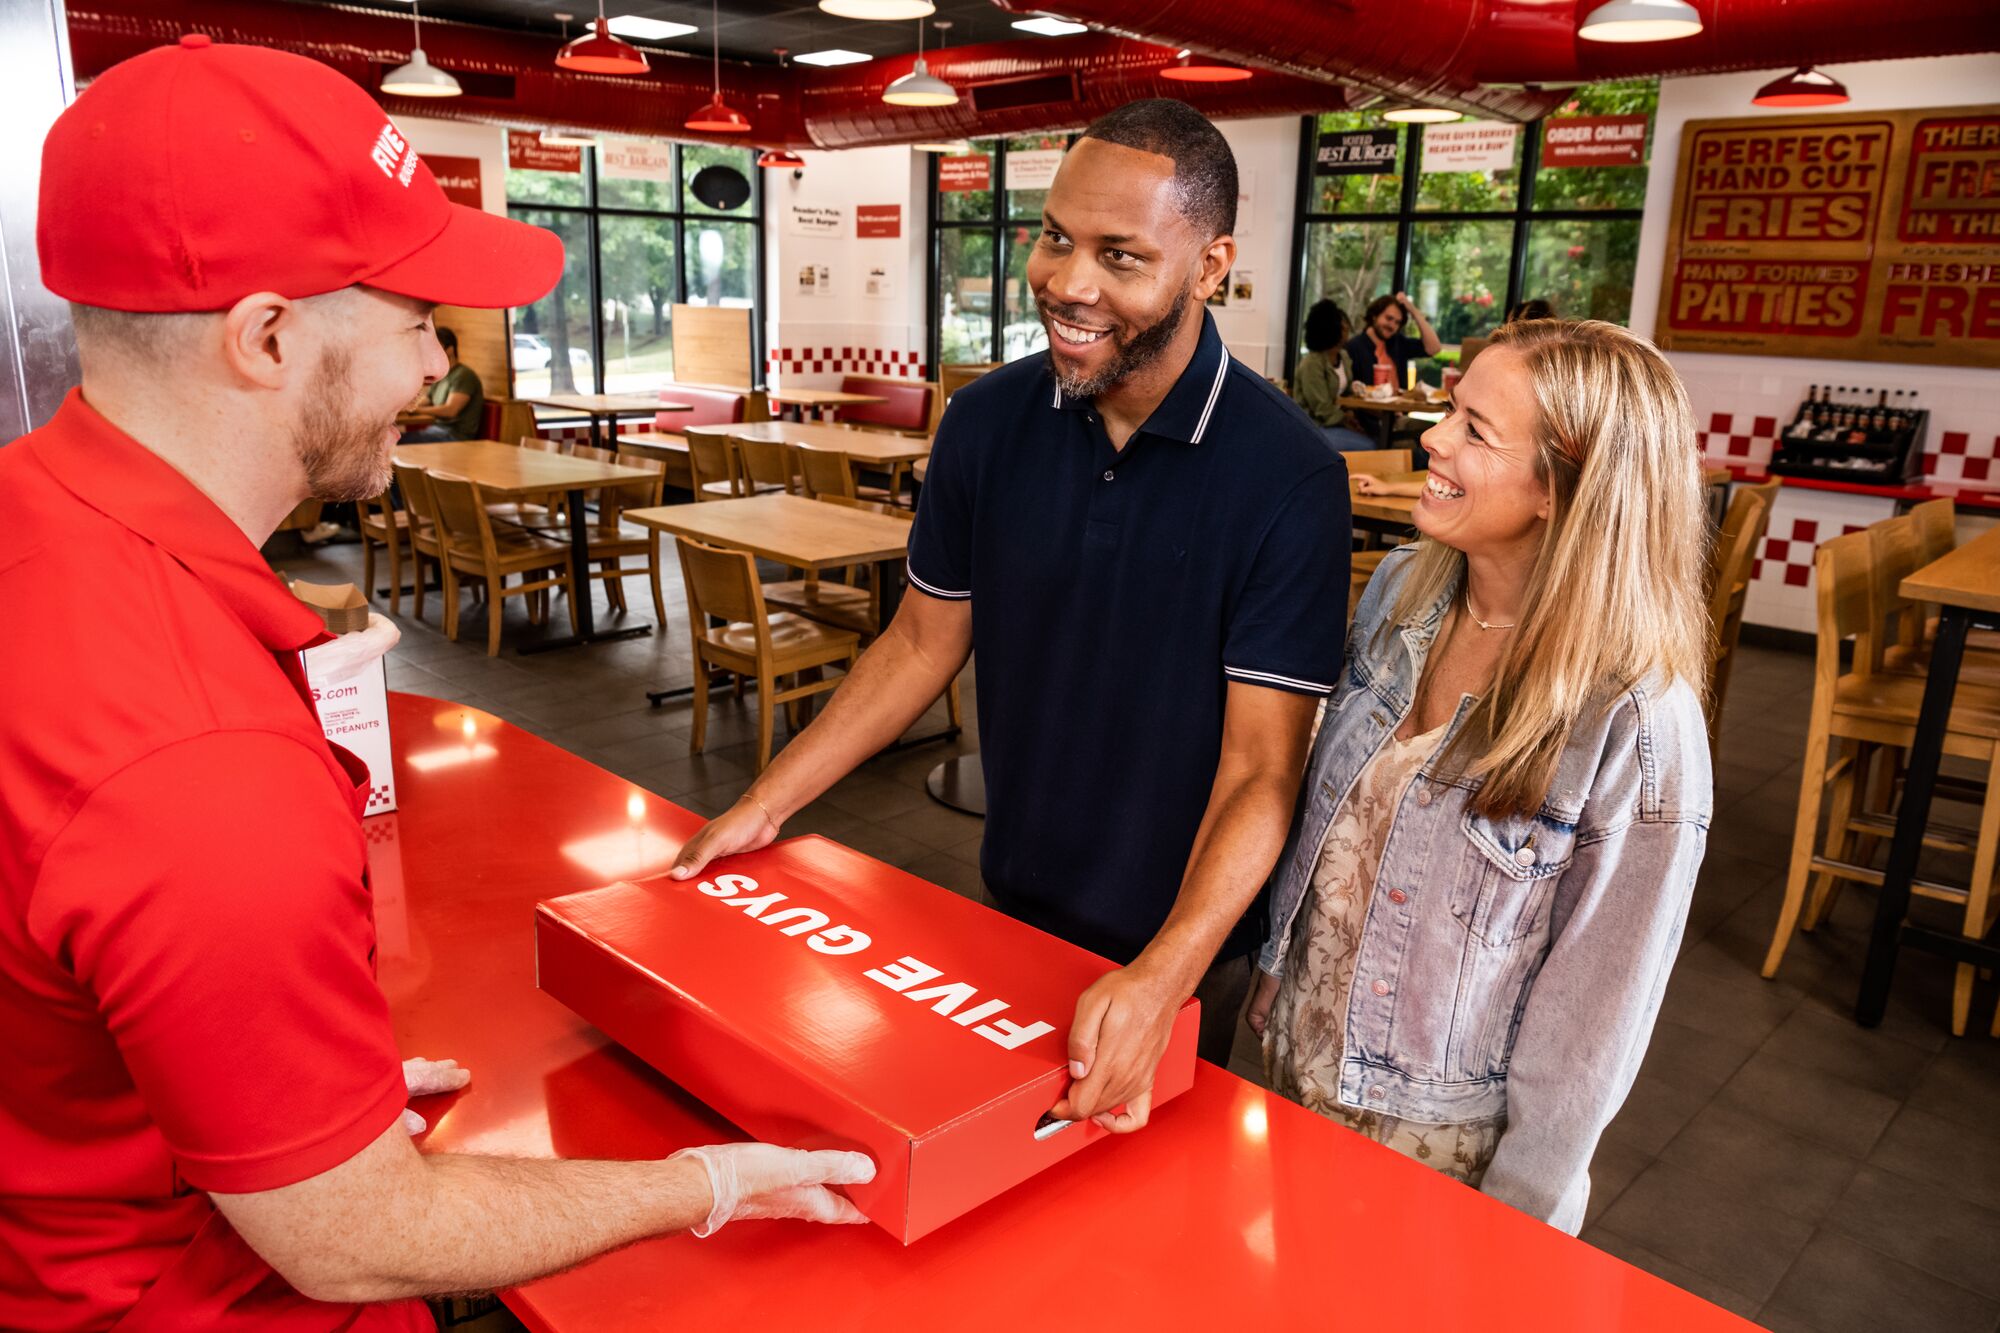 A couple collect their Five Guys catering box from a Five Guys employee at a Five Guys restaurant. Five Guys Ottawa (613)562-8119